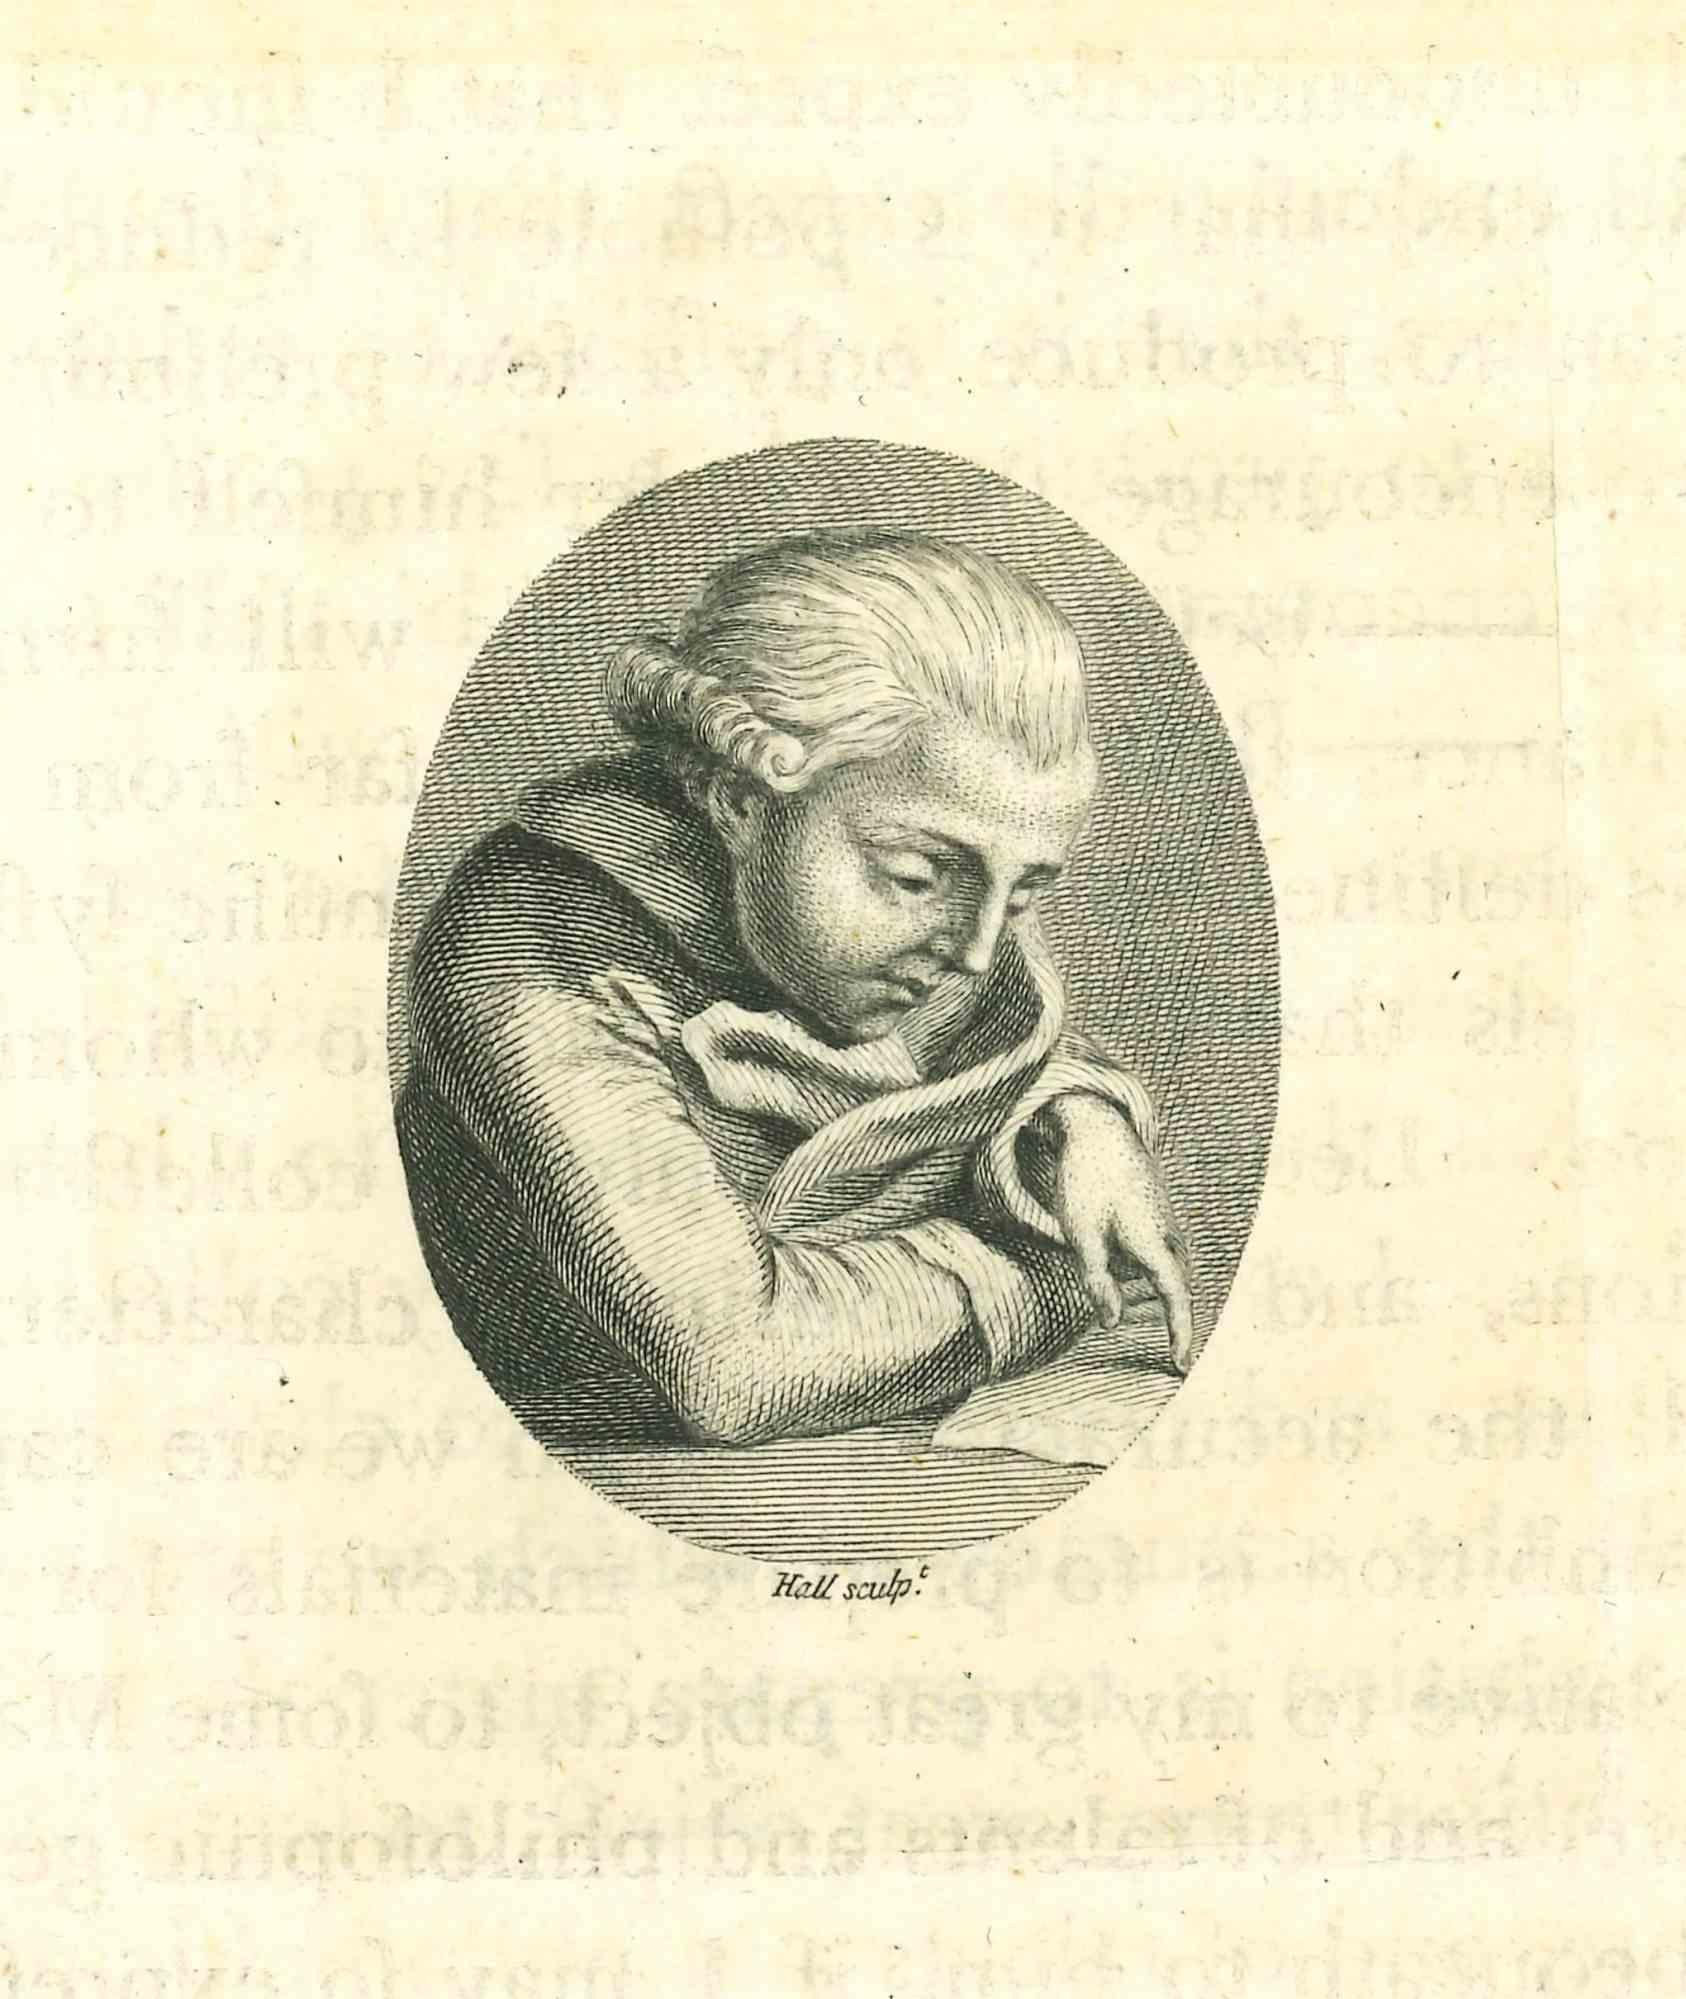 Portrait of Man While Reading is an original artwork realized by John Hall for Johann Caspar Lavater's "Essays on Physiognomy, Designed to promote the Knowledge and the Love of Mankind", London, Bensley, 1810. 

This artwork portrays a historical